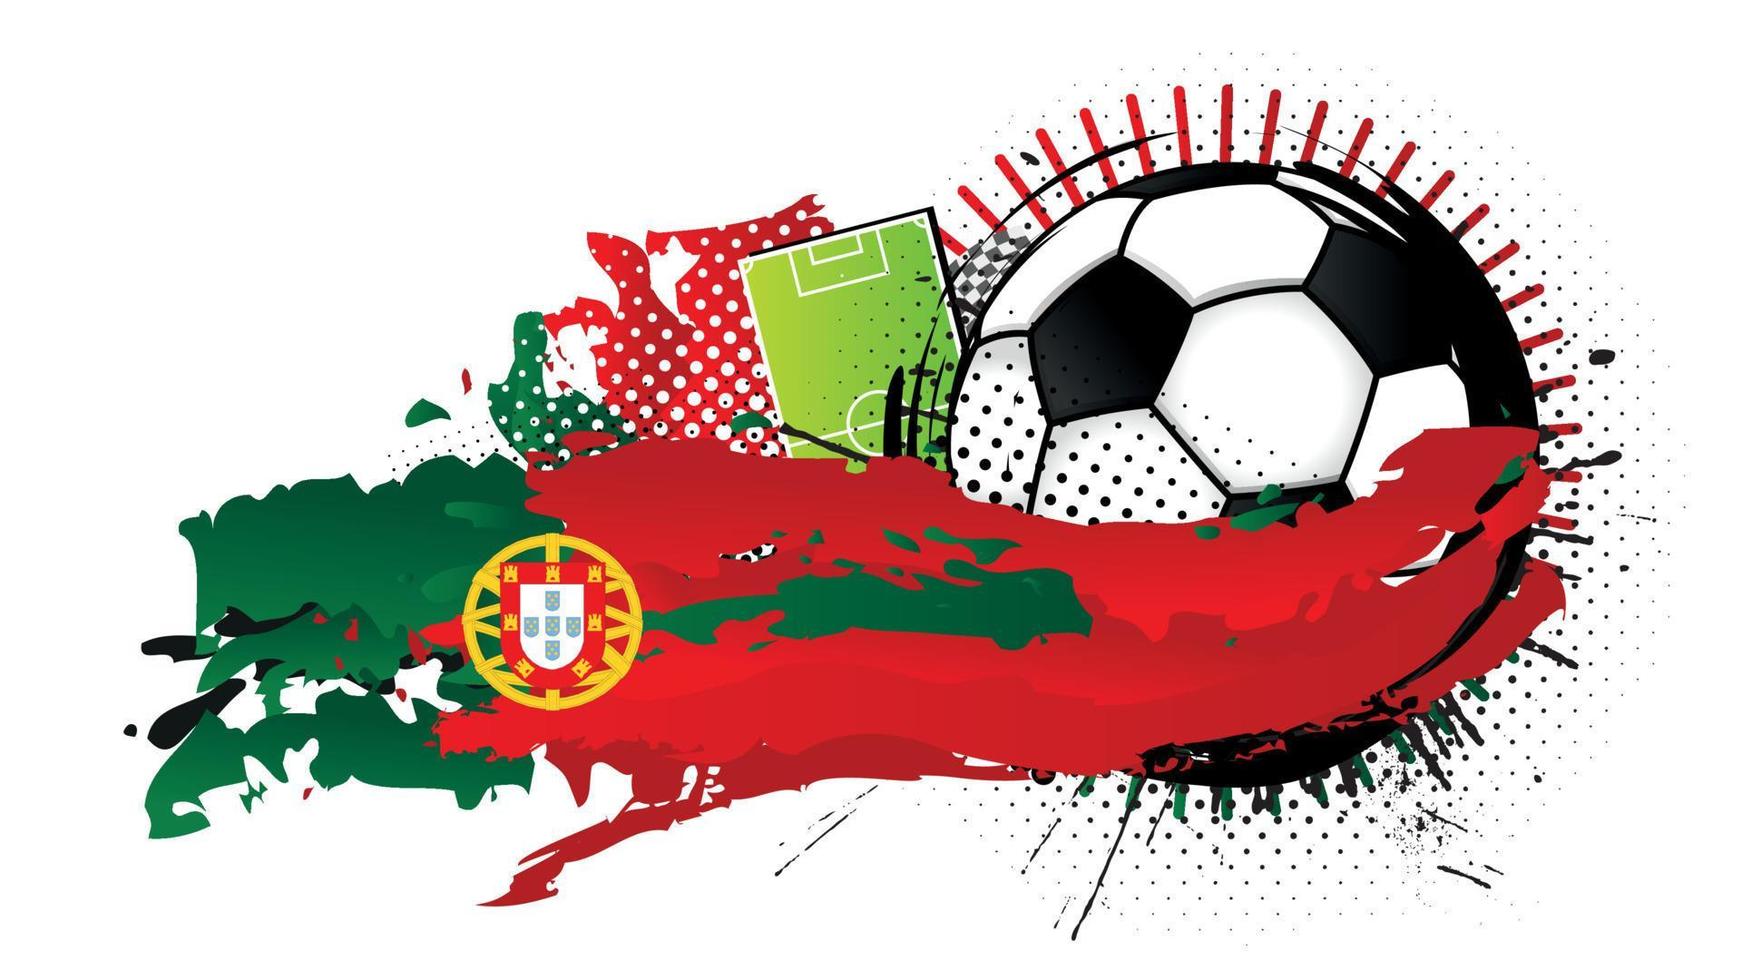 Black and white soccer ball surrounded by red and green spots forming the flag of Portugal with a soccer field in the background. Vector image